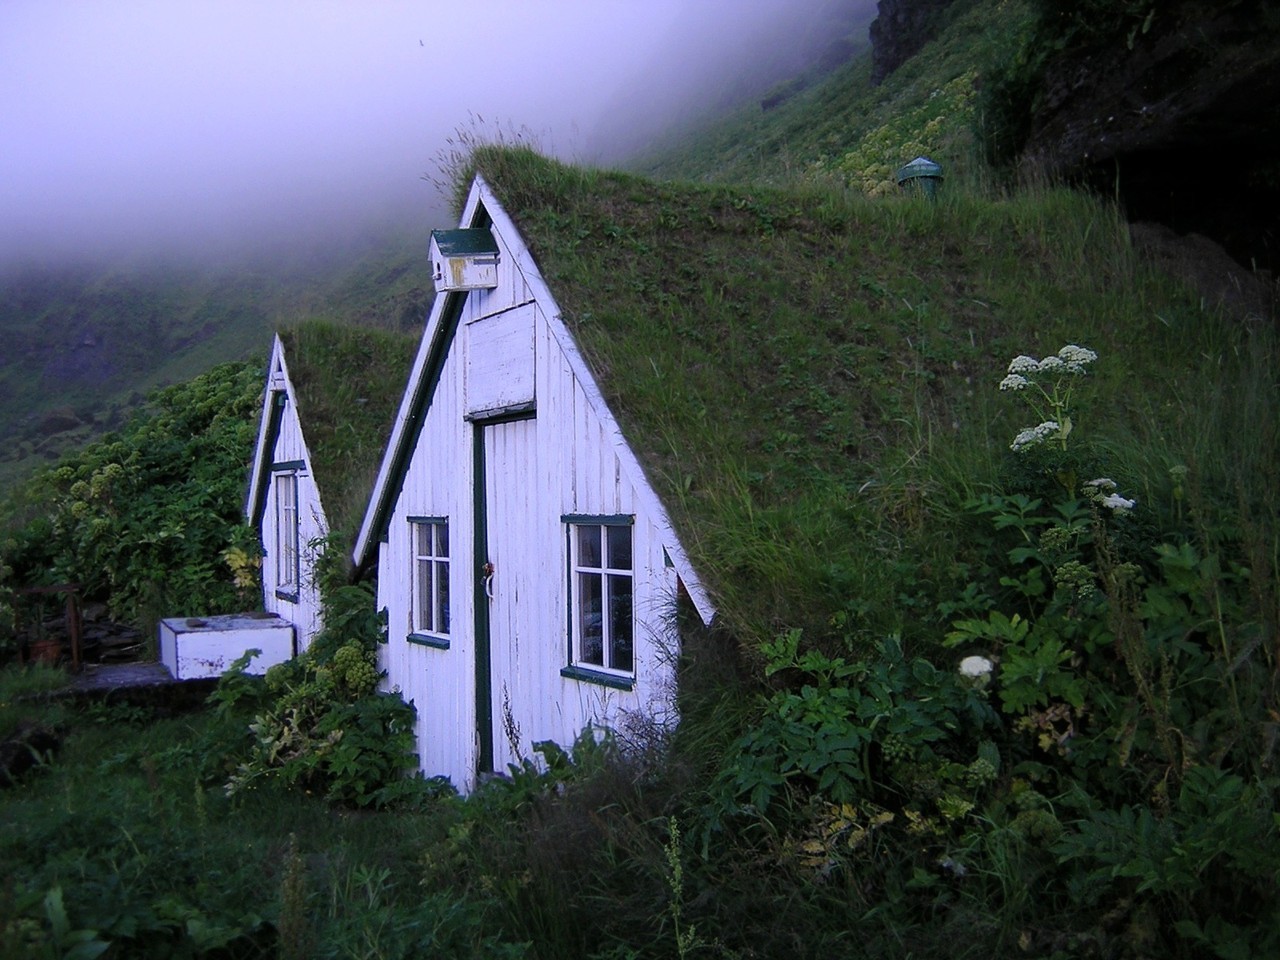 cabinporn:  Sod roof houses in Vik, Iceland. Photo by Gilles Baldet. The birdhouses